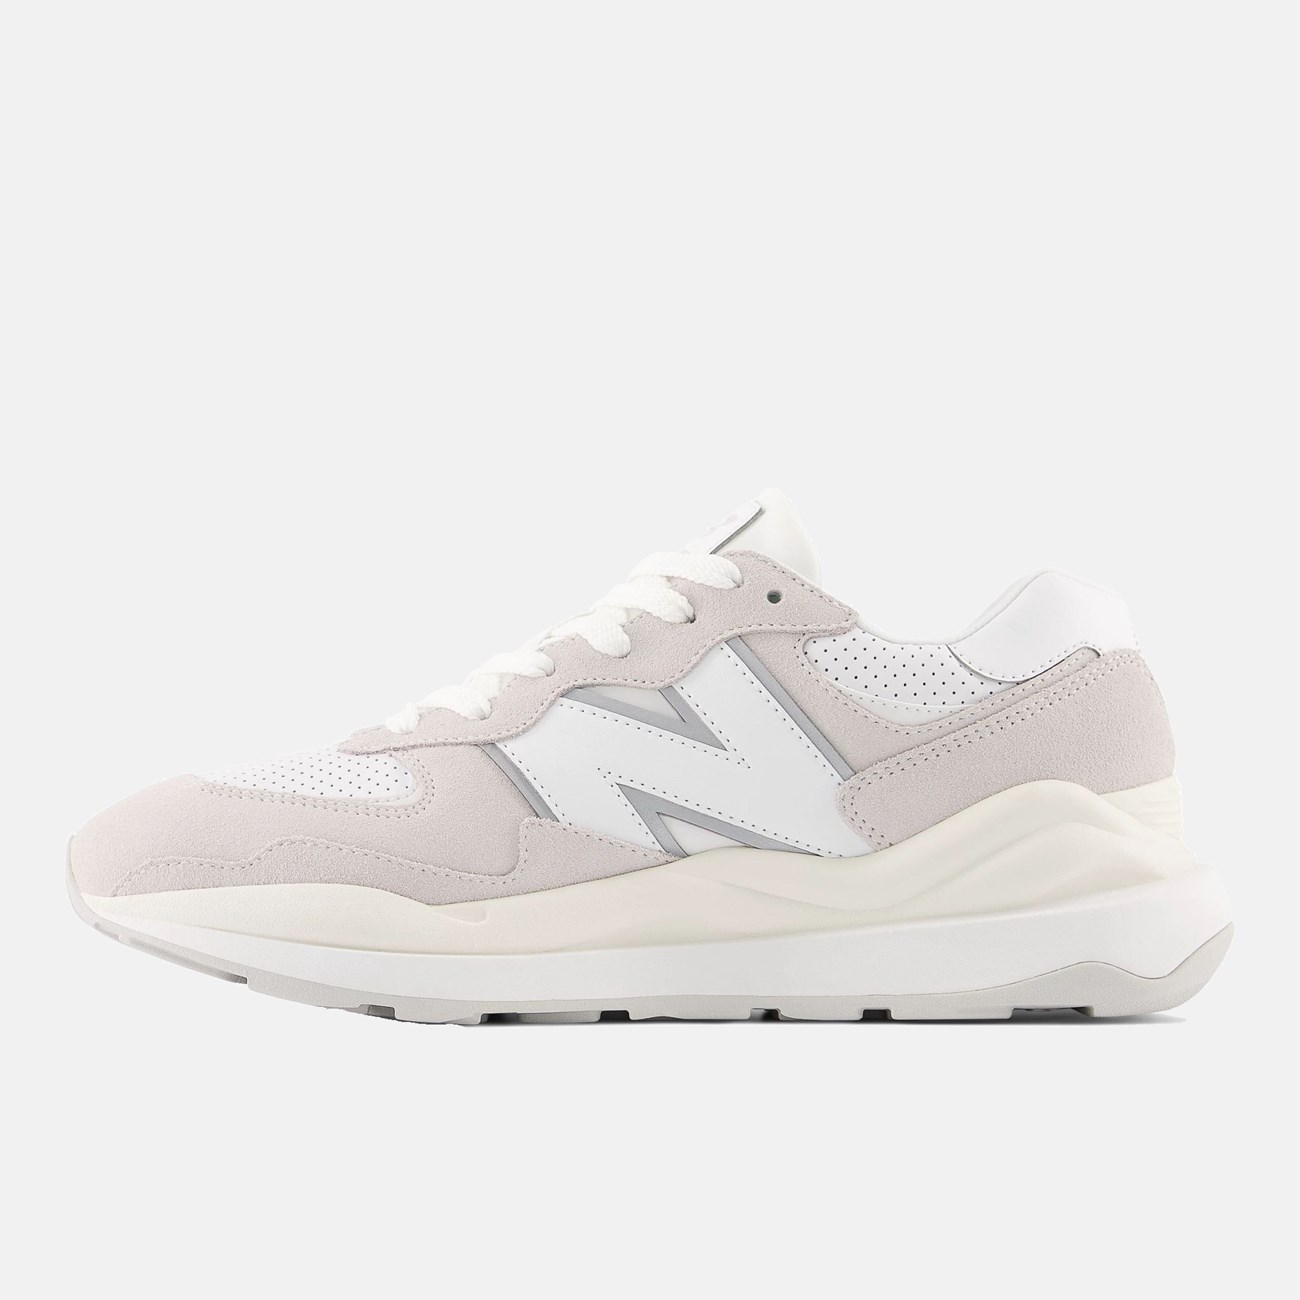 NEW BALANCE Ανδρικά Sneakers 57/40 M5740 - The Athlete's Foot